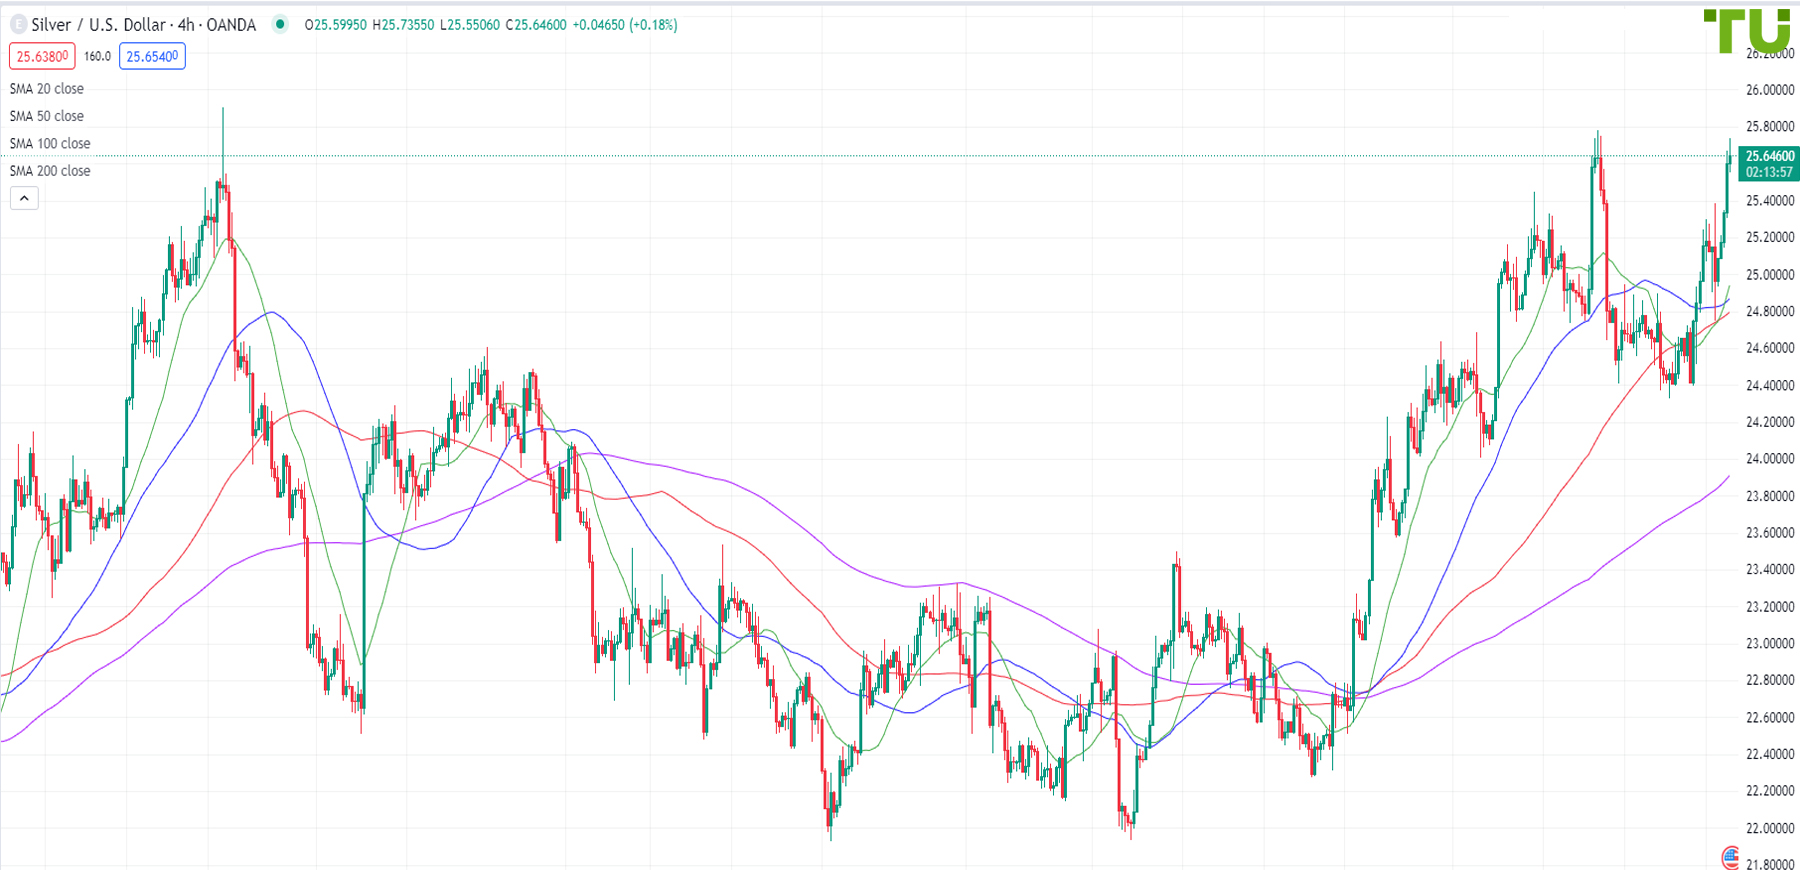 XAG/USD is testing strong resistance at 25.75 dollars per ounce